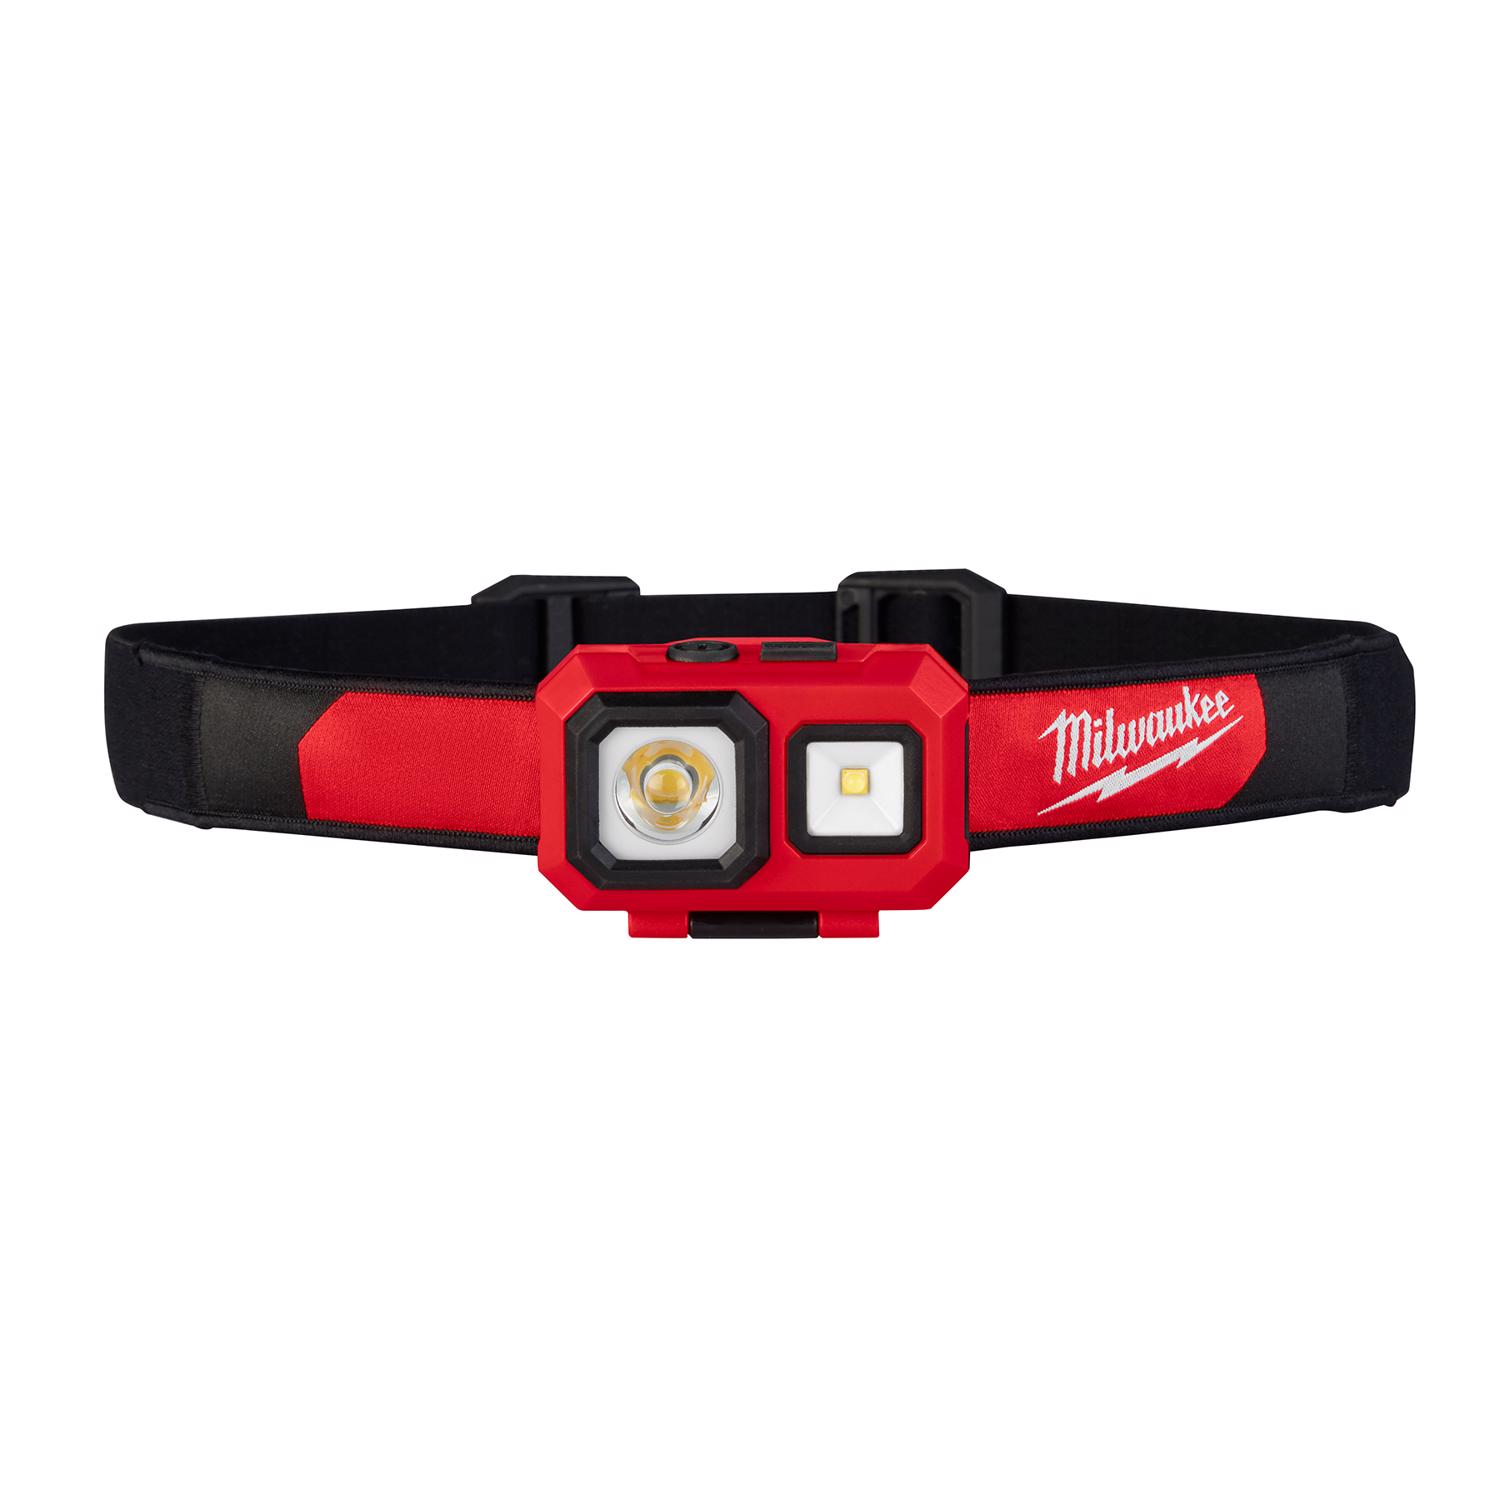 Photos - Torch Milwaukee 450 lm Black/Red LED Head Lamp AAA Battery 2104 